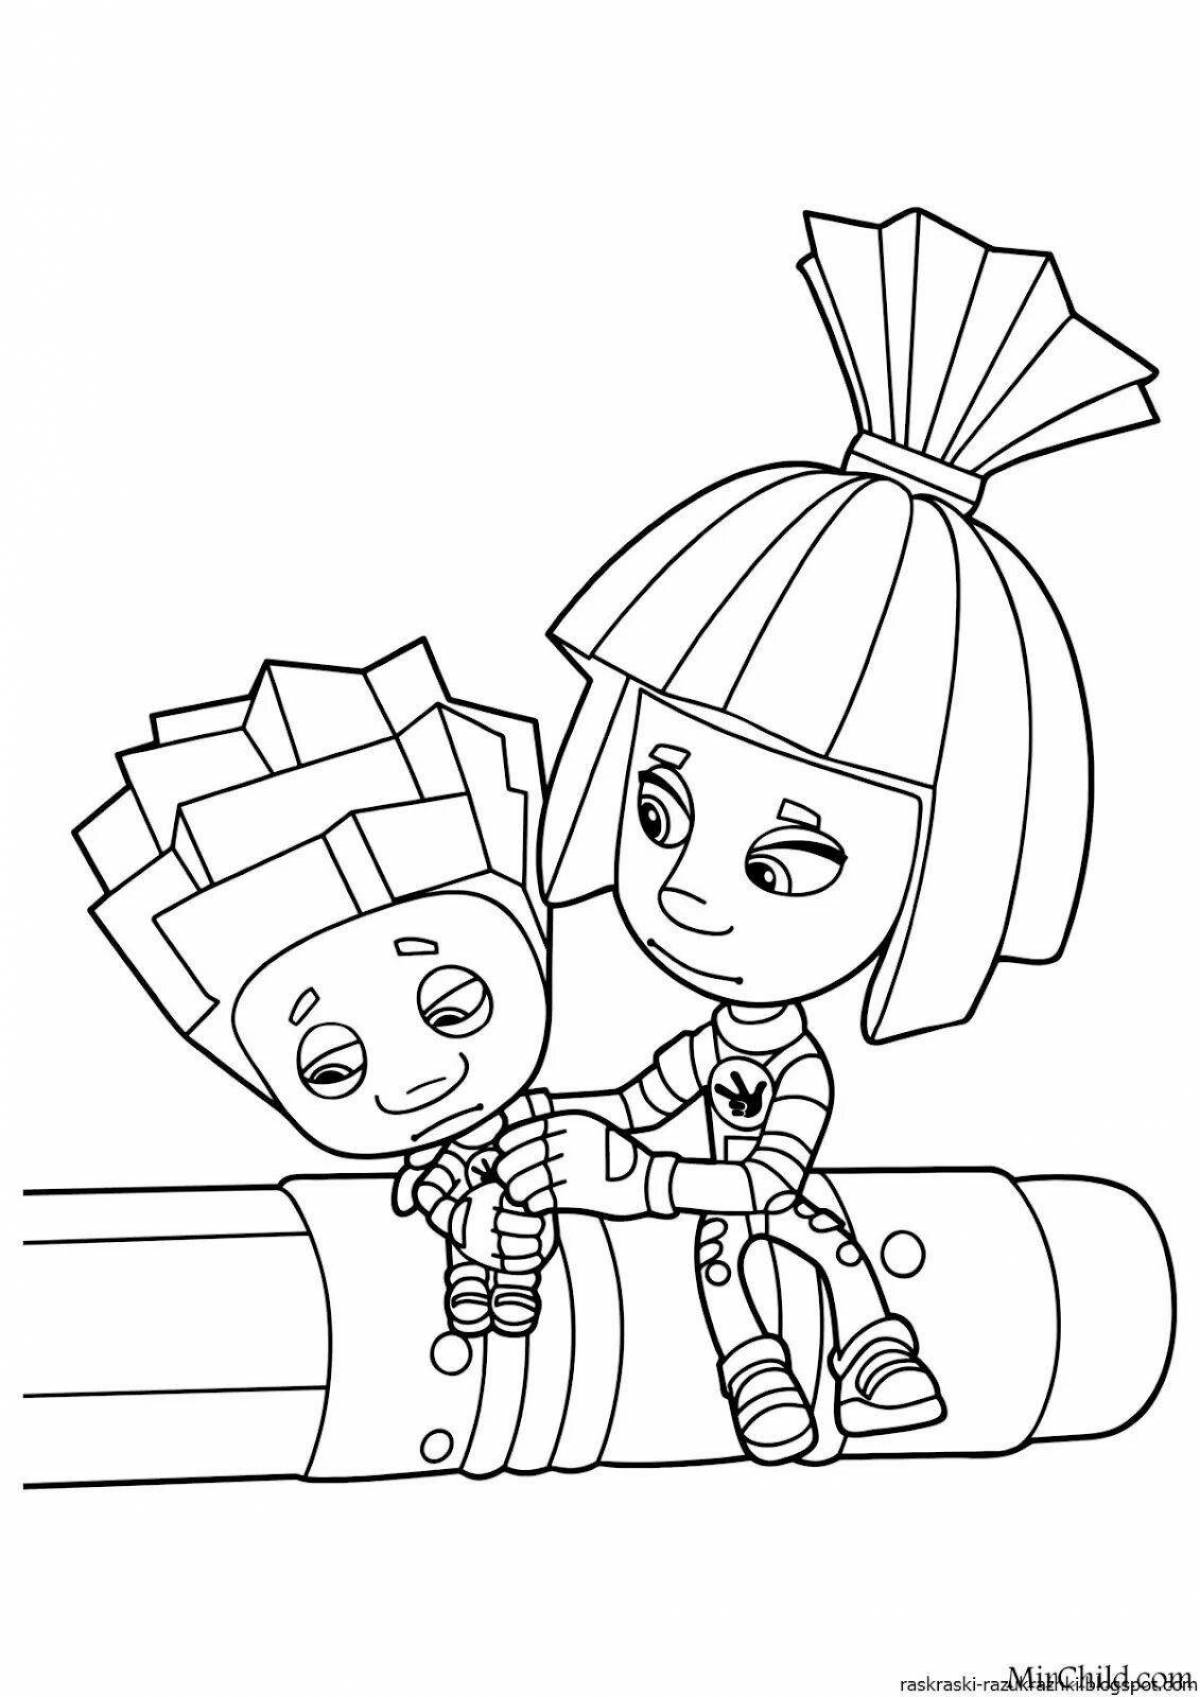 Perfect coloring page enable it